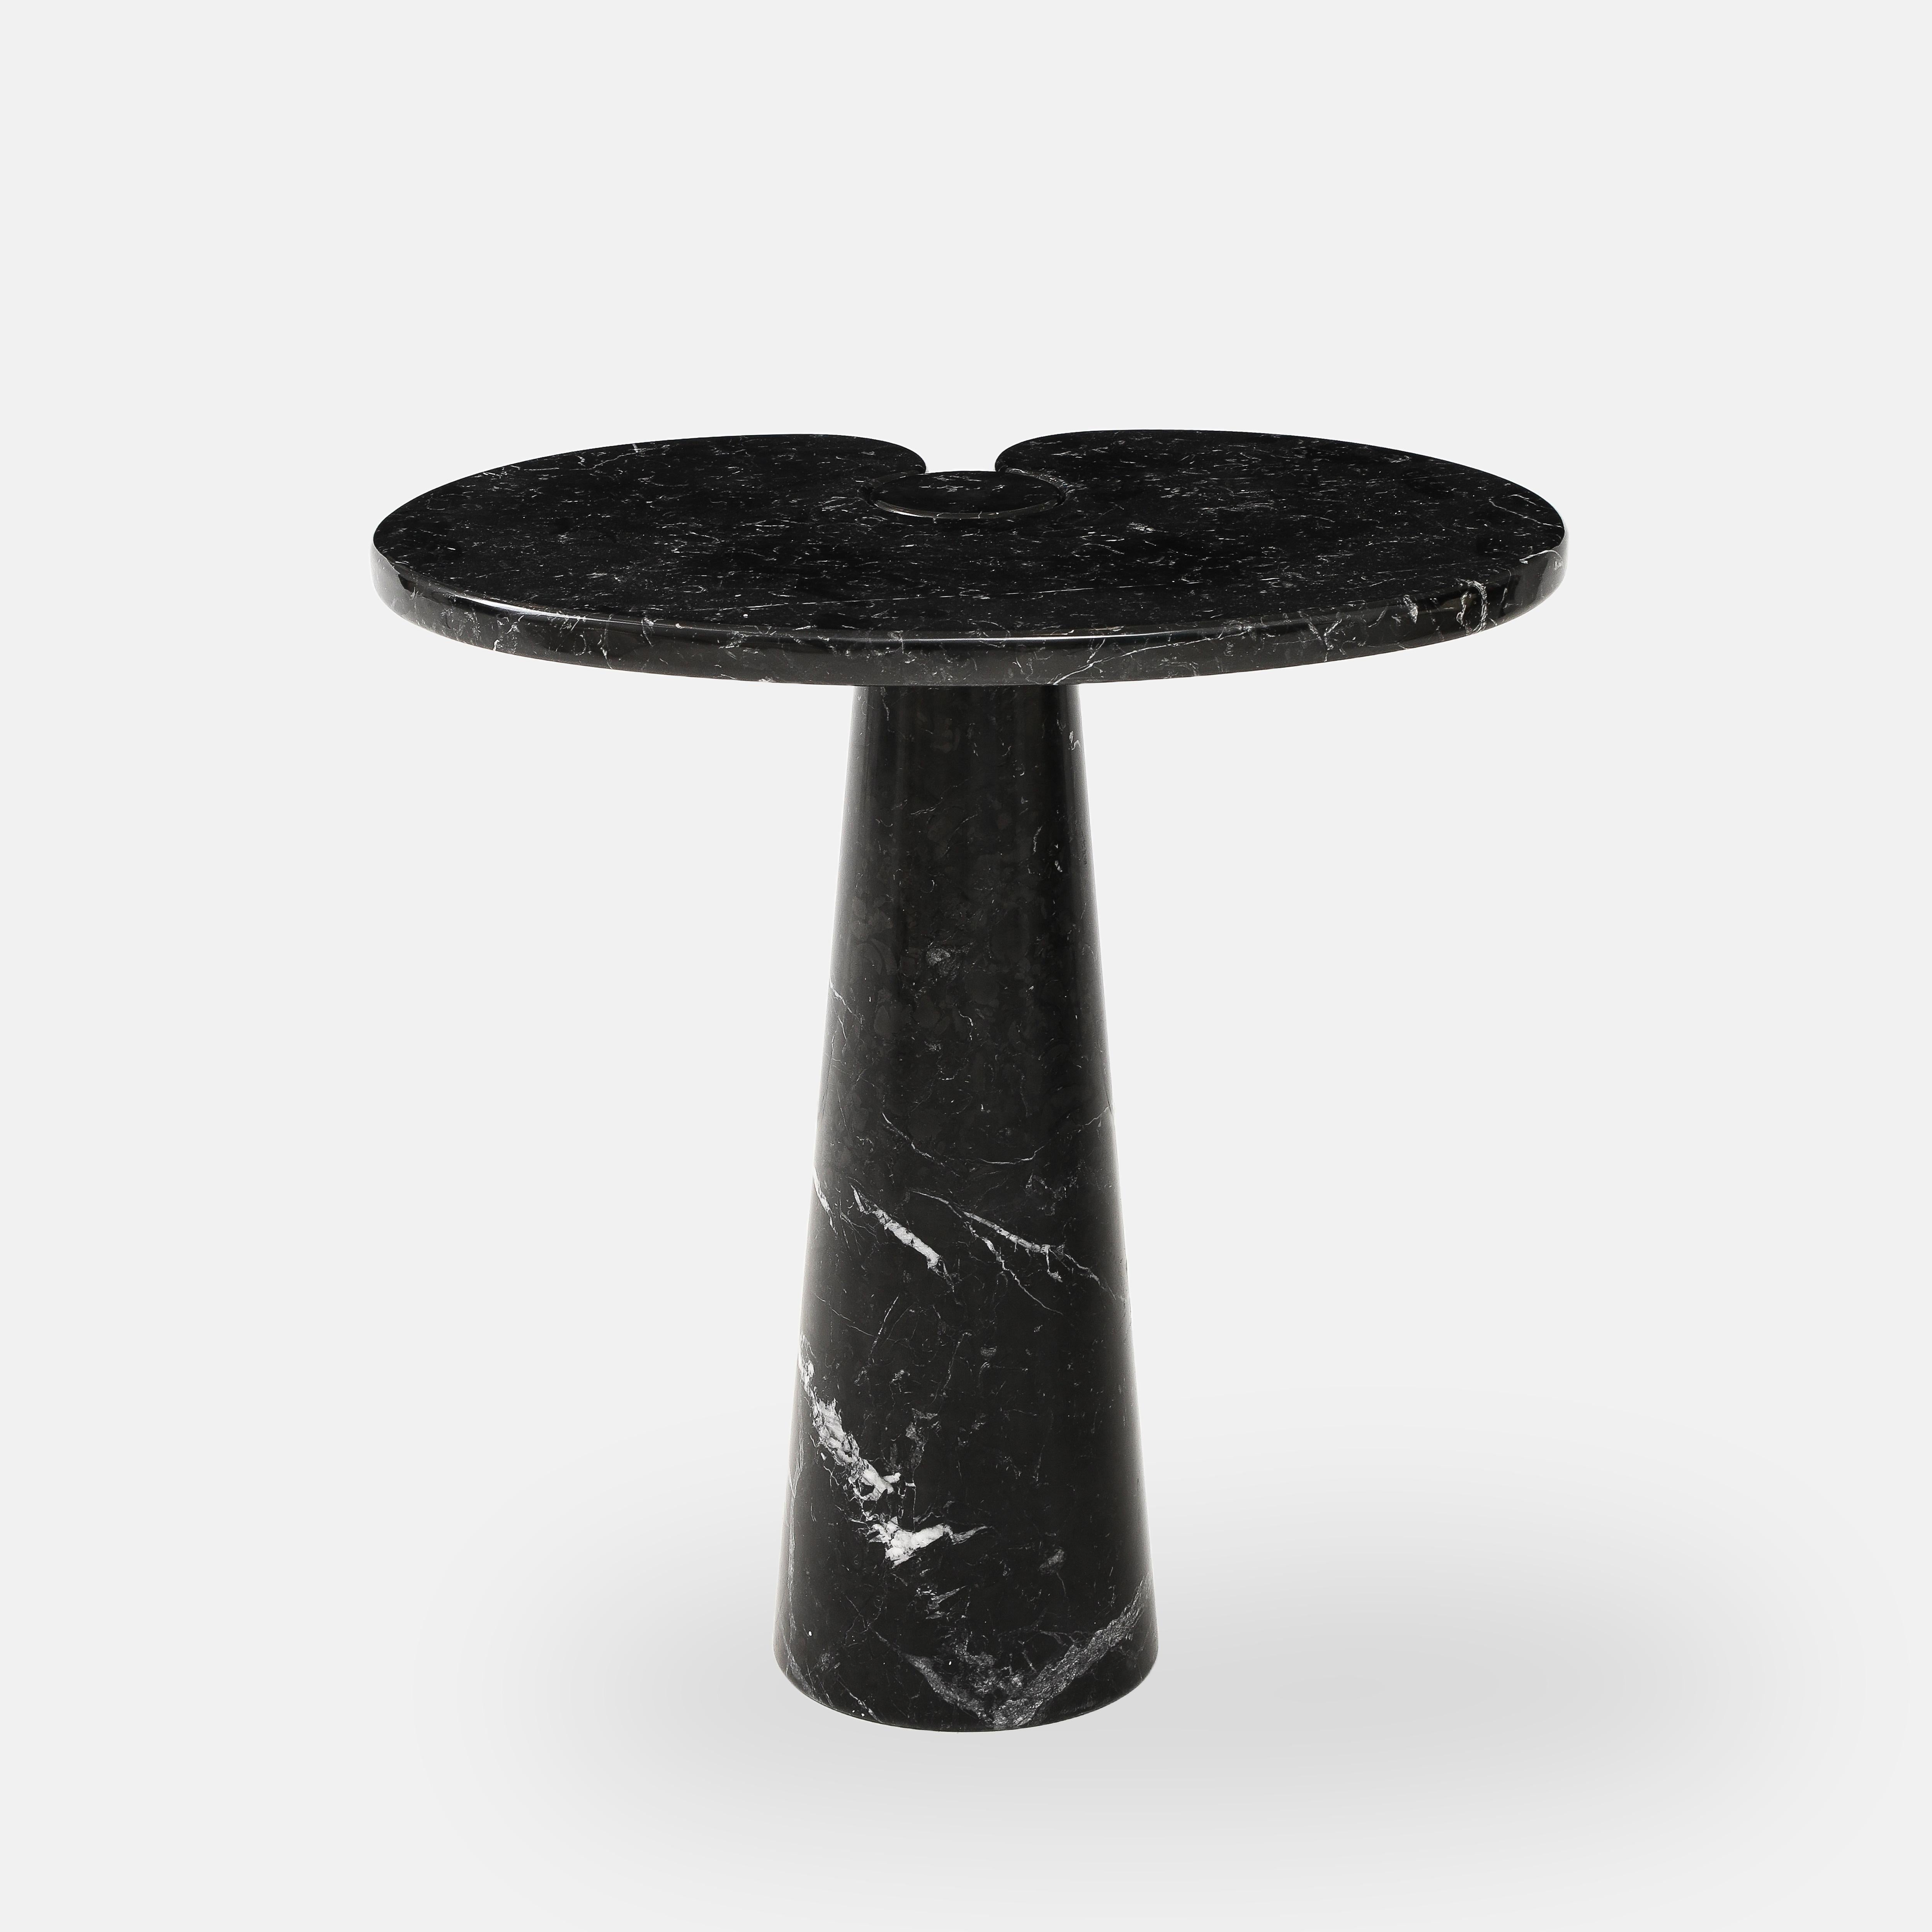 Polished Angelo Mangiarotti Nero Marquina Marble Tall Side Table from Eros Series, 1971 For Sale